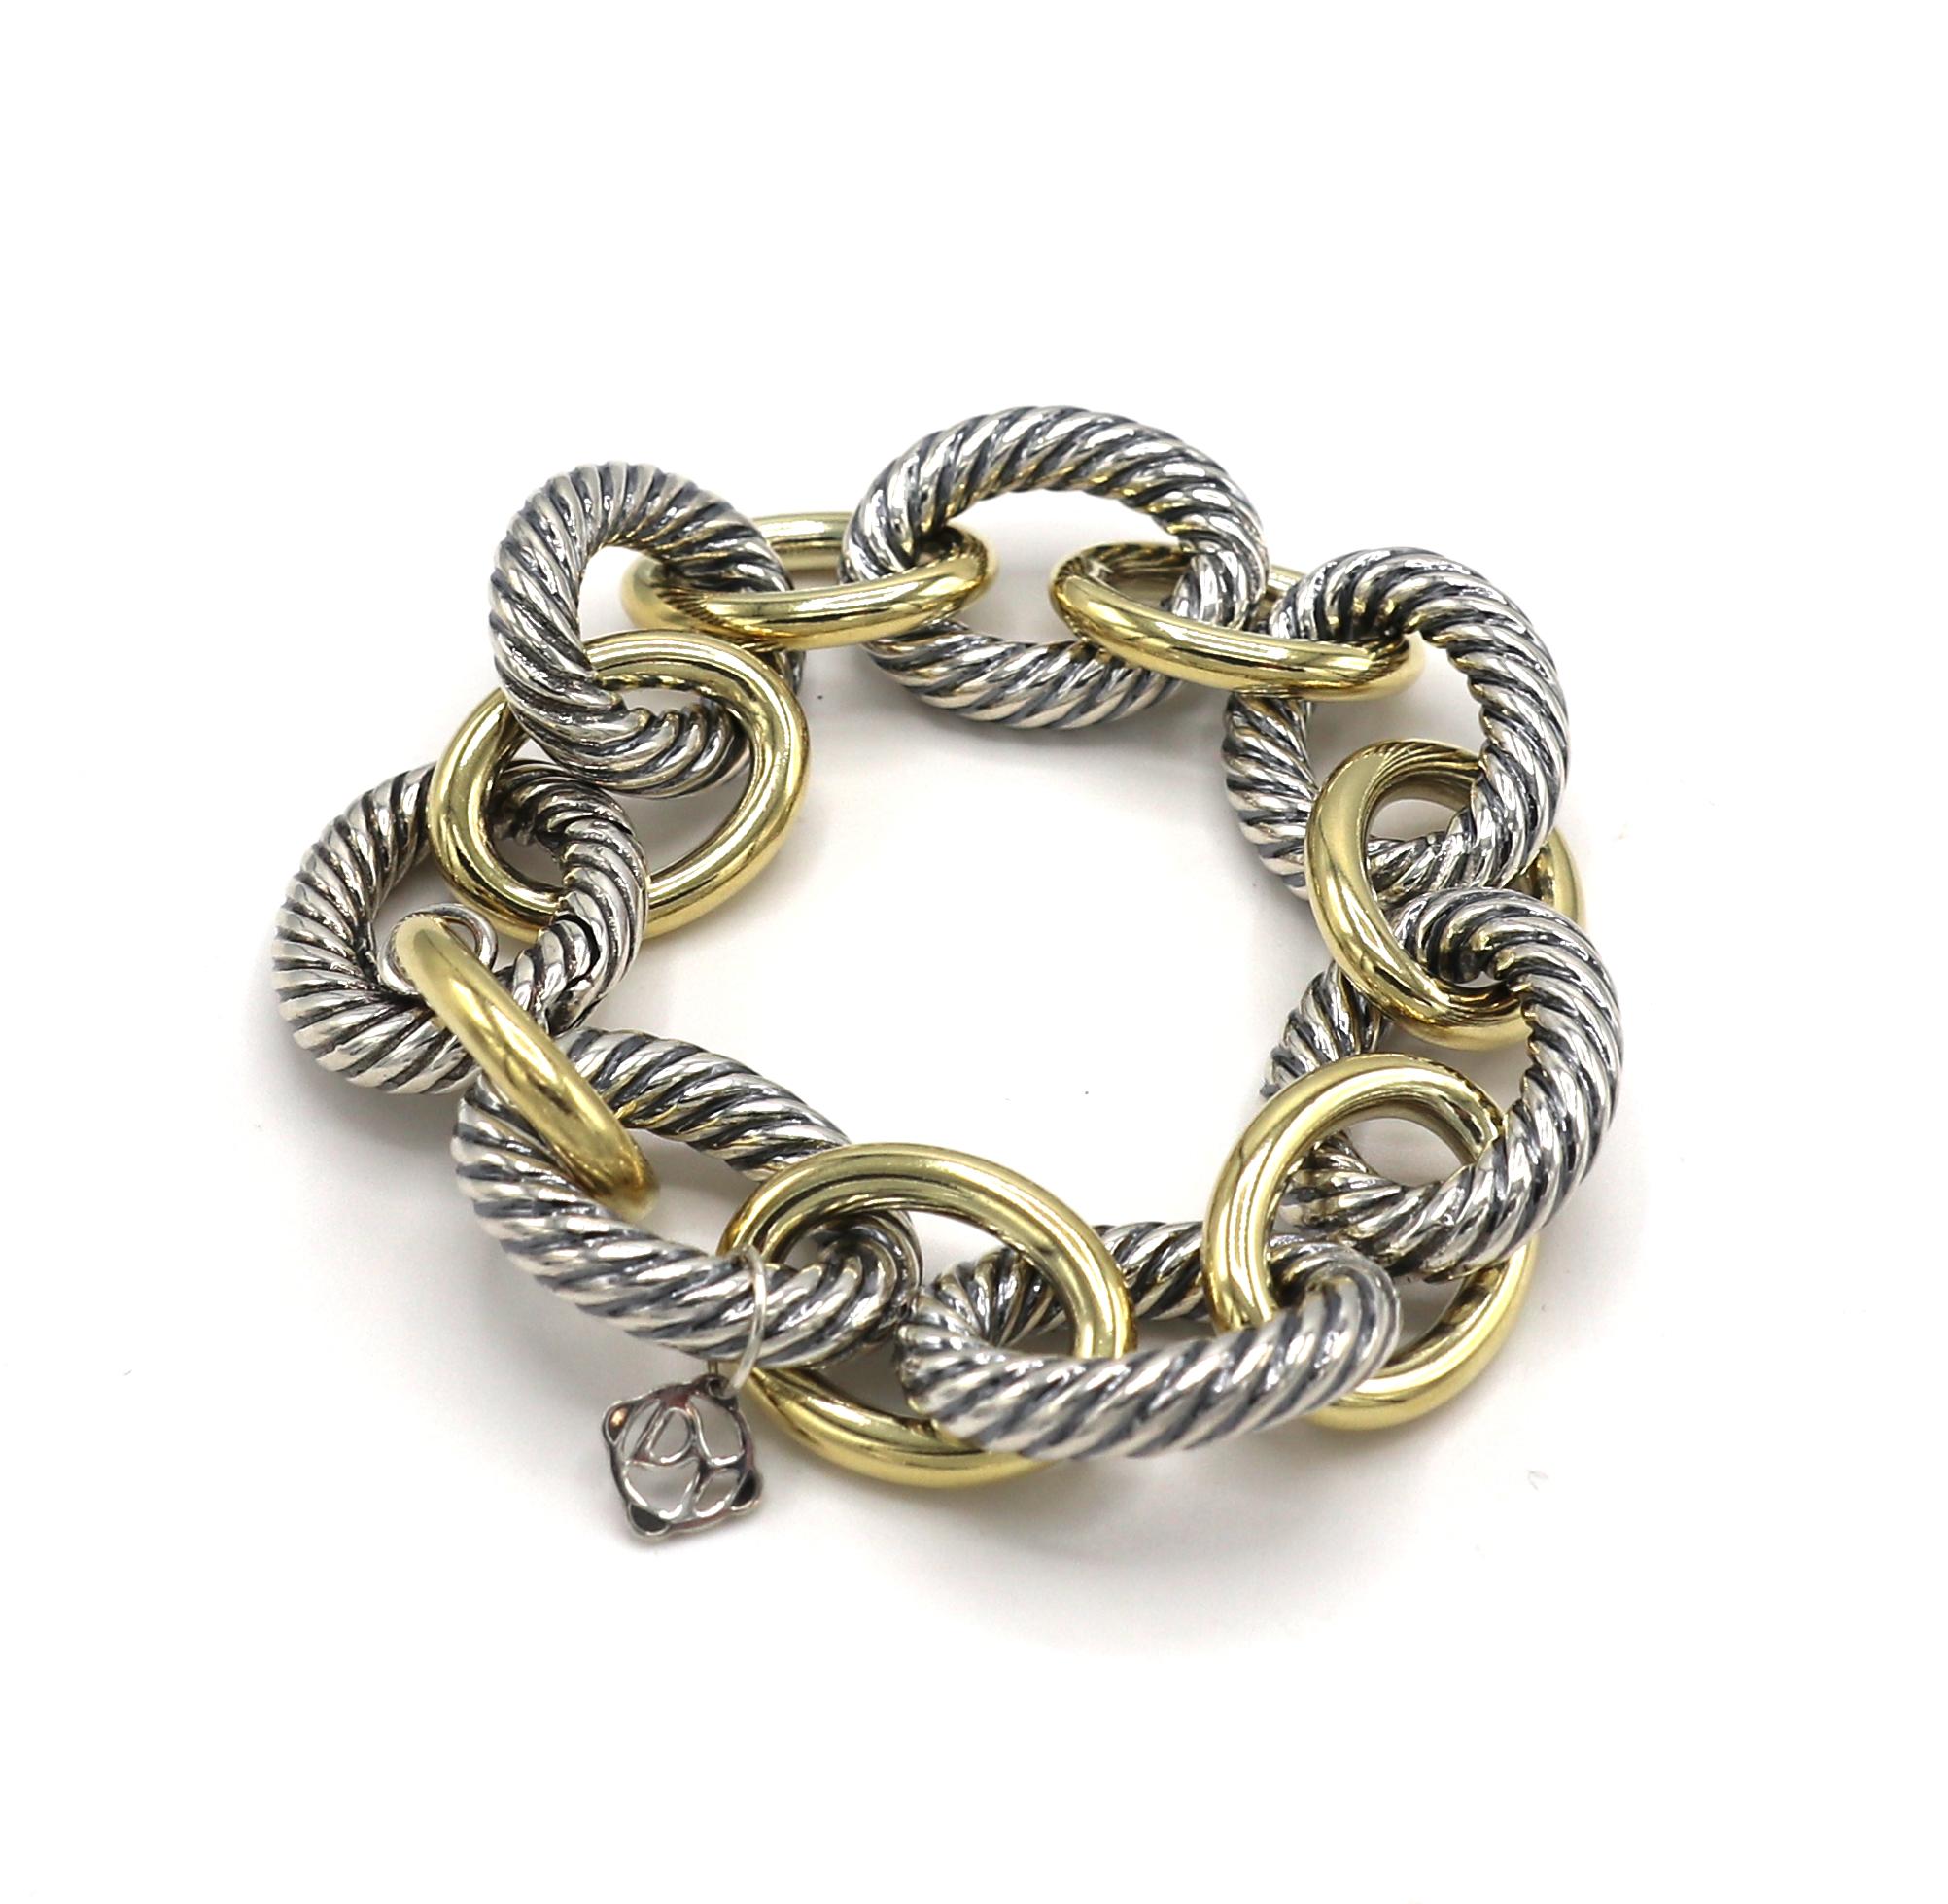 David Yurman Sterling Silver & Gold Oval Link Chain Bracelet 
Metal: Sterling silver & 18 karat yellow gold
Weight: 56.7 grams
Length: 8 inches
Silver links: 18 x 23mm
Gold links: 15 x 20mm
